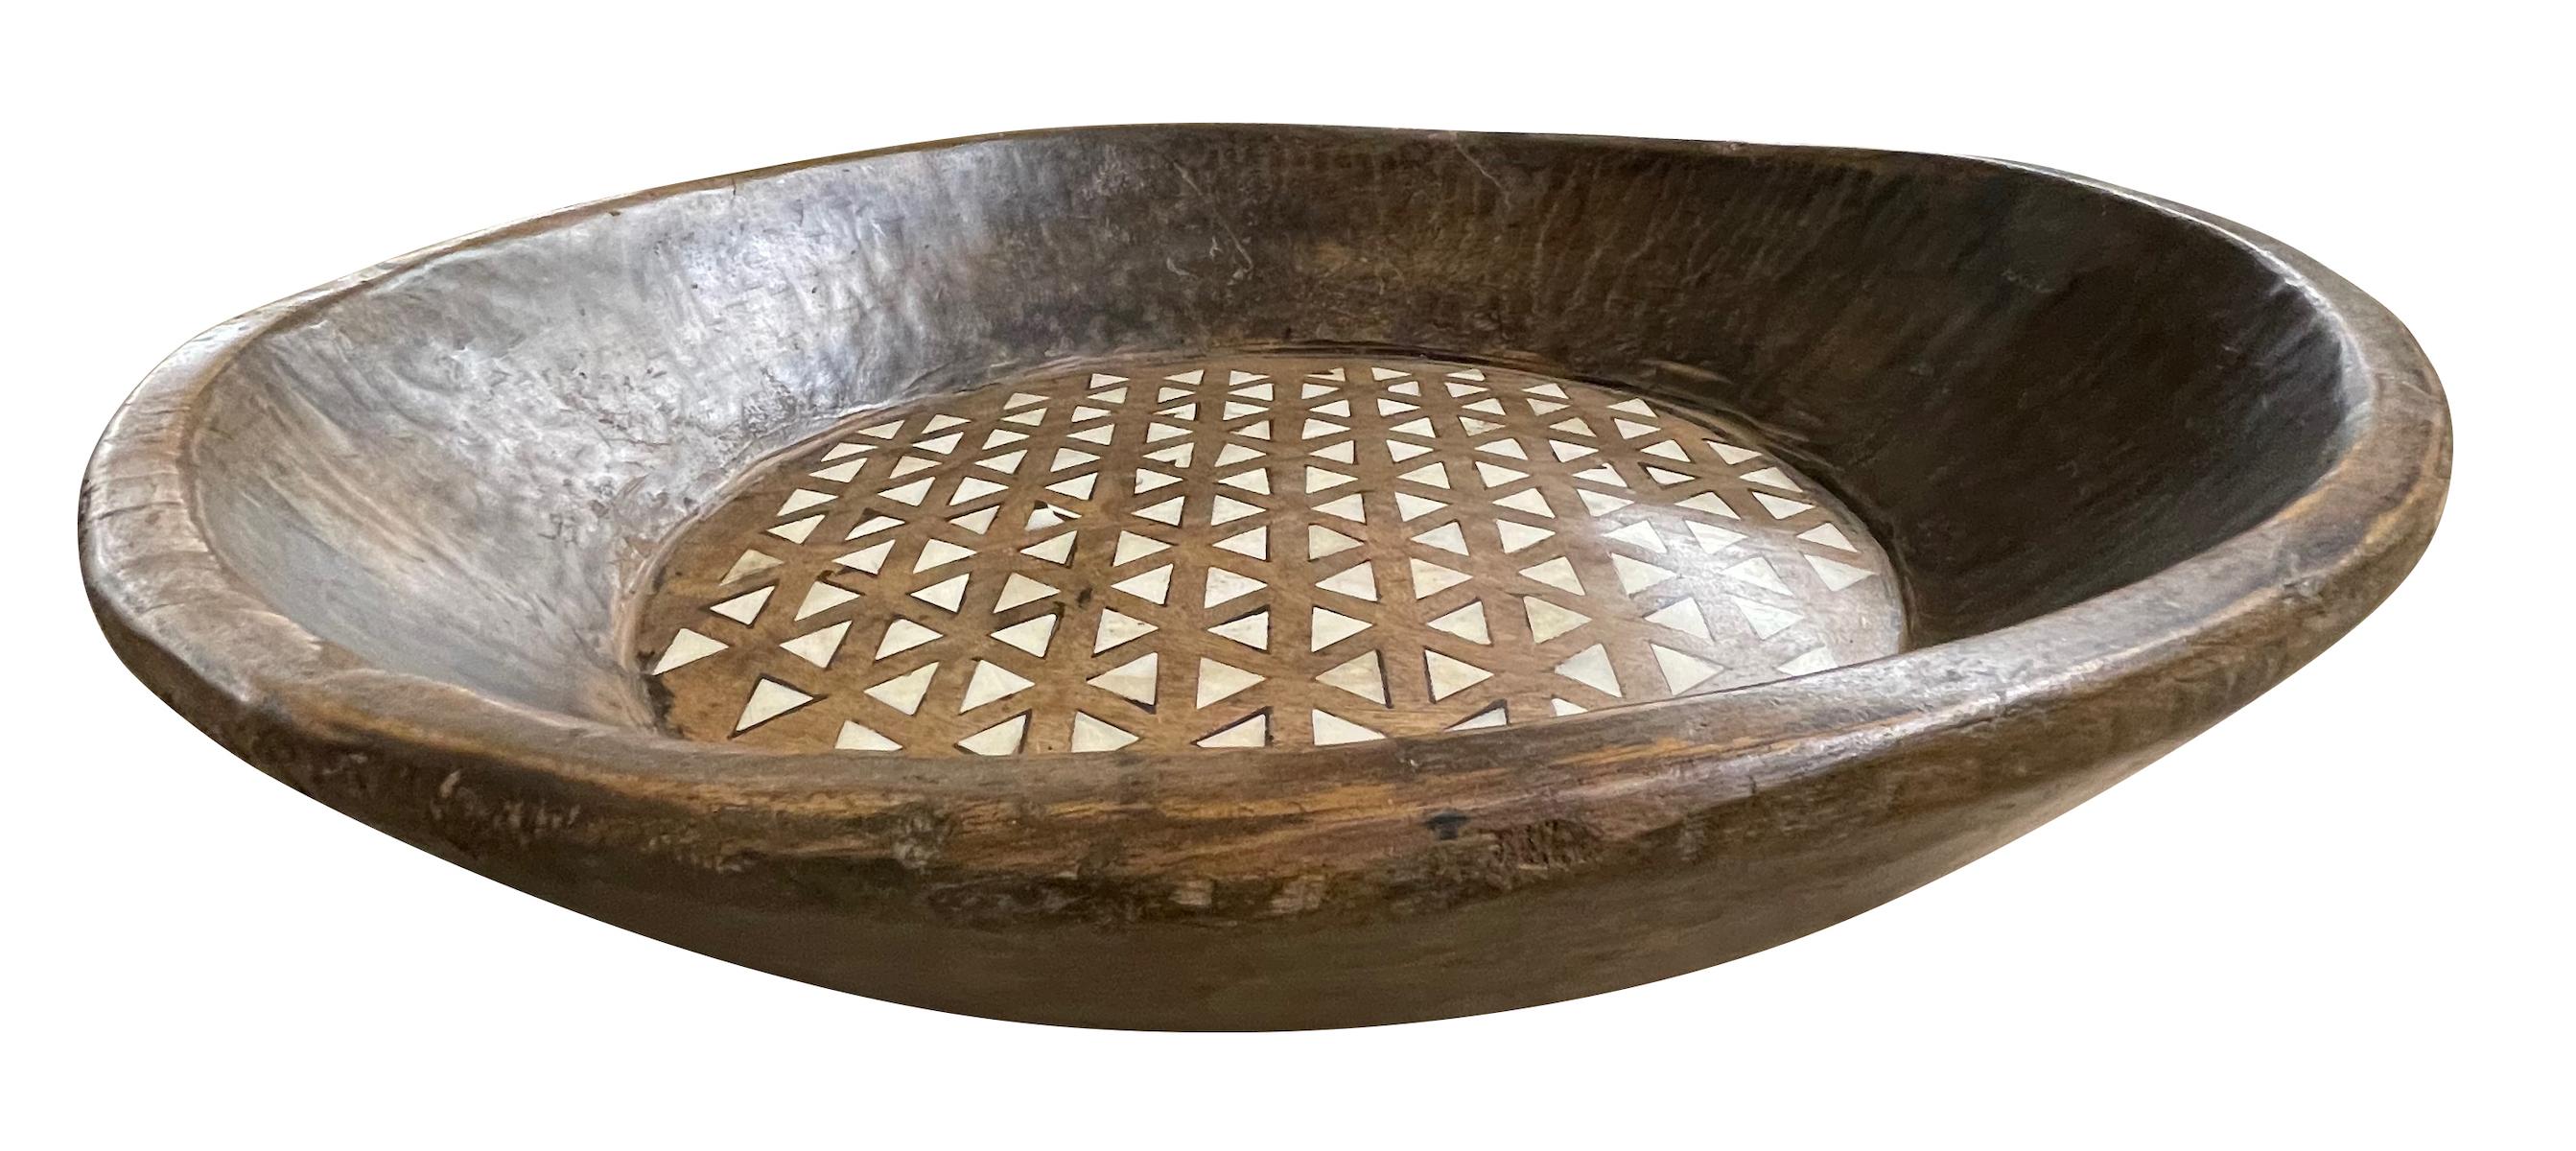 Contemporary Indian round wood bowl with triangular shaped bone inlay.
